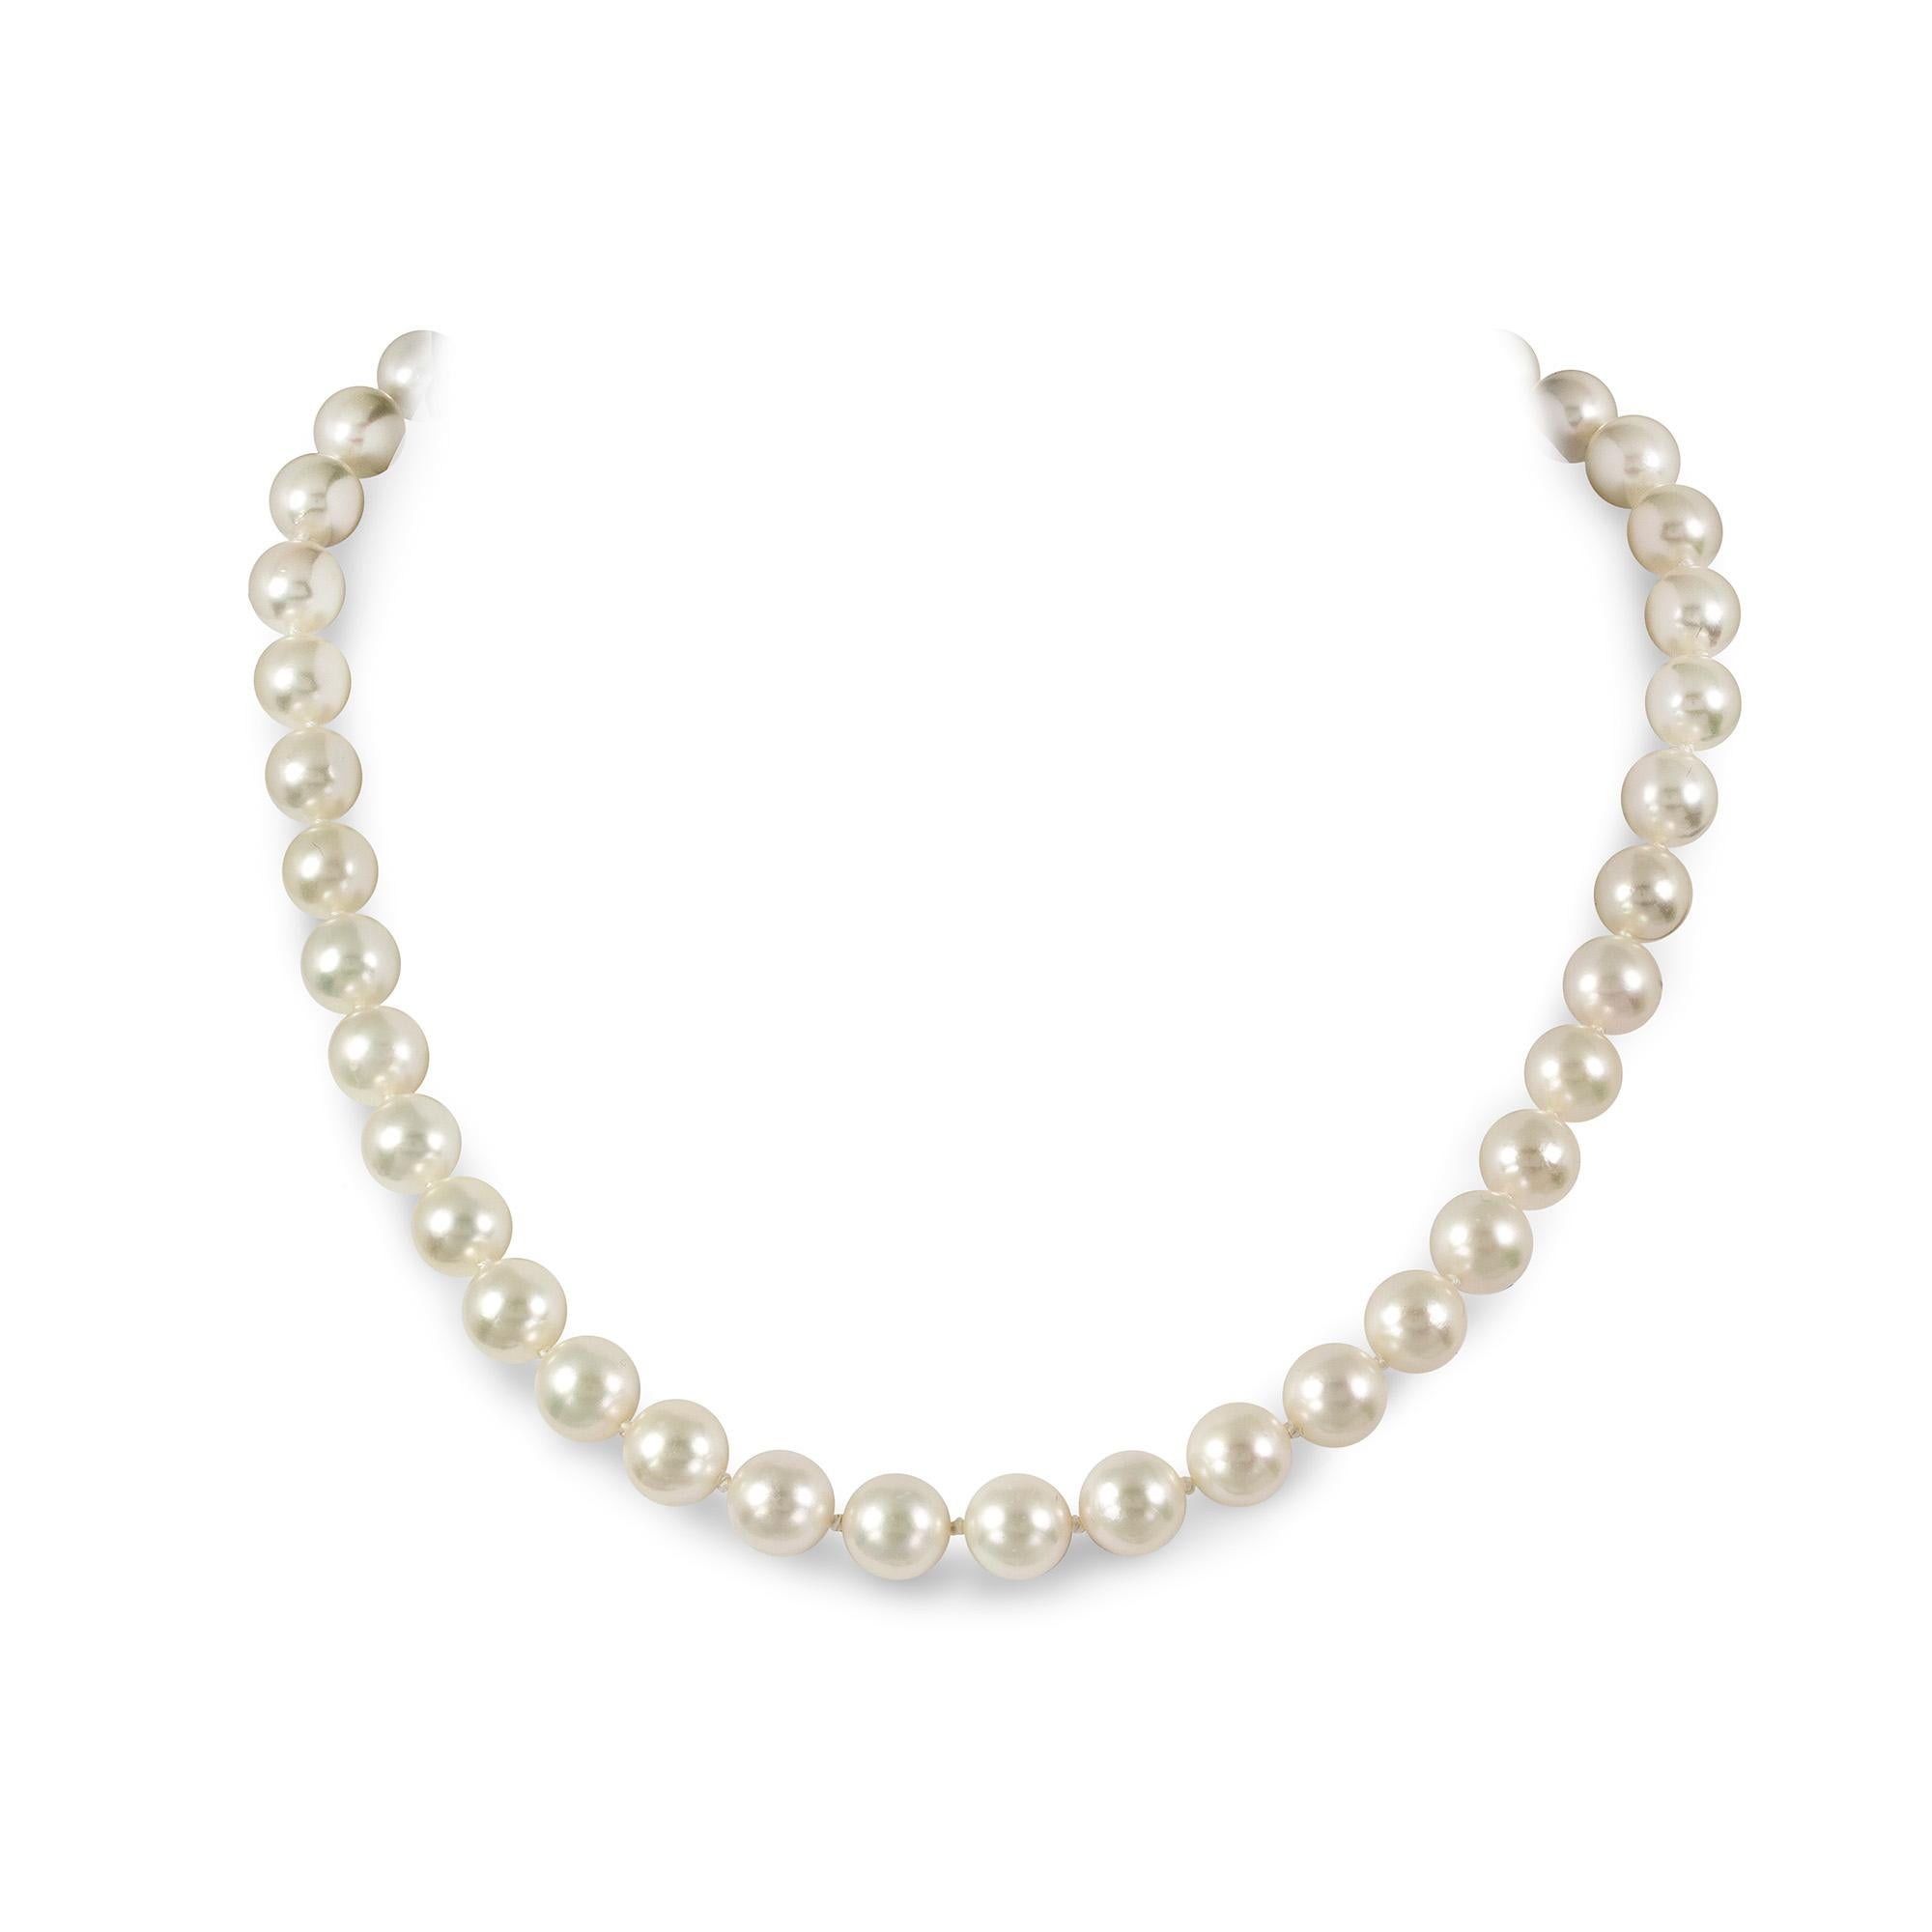 A pearl and diamond necklace, the necklace strung with 42 spherical cultured pearls measuring approximately 9.5-10 mm in diameter, with diamond-set filigree openwork barrel clasp, the round brilliant-cut diamonds all millegrain-set in 18 carat white